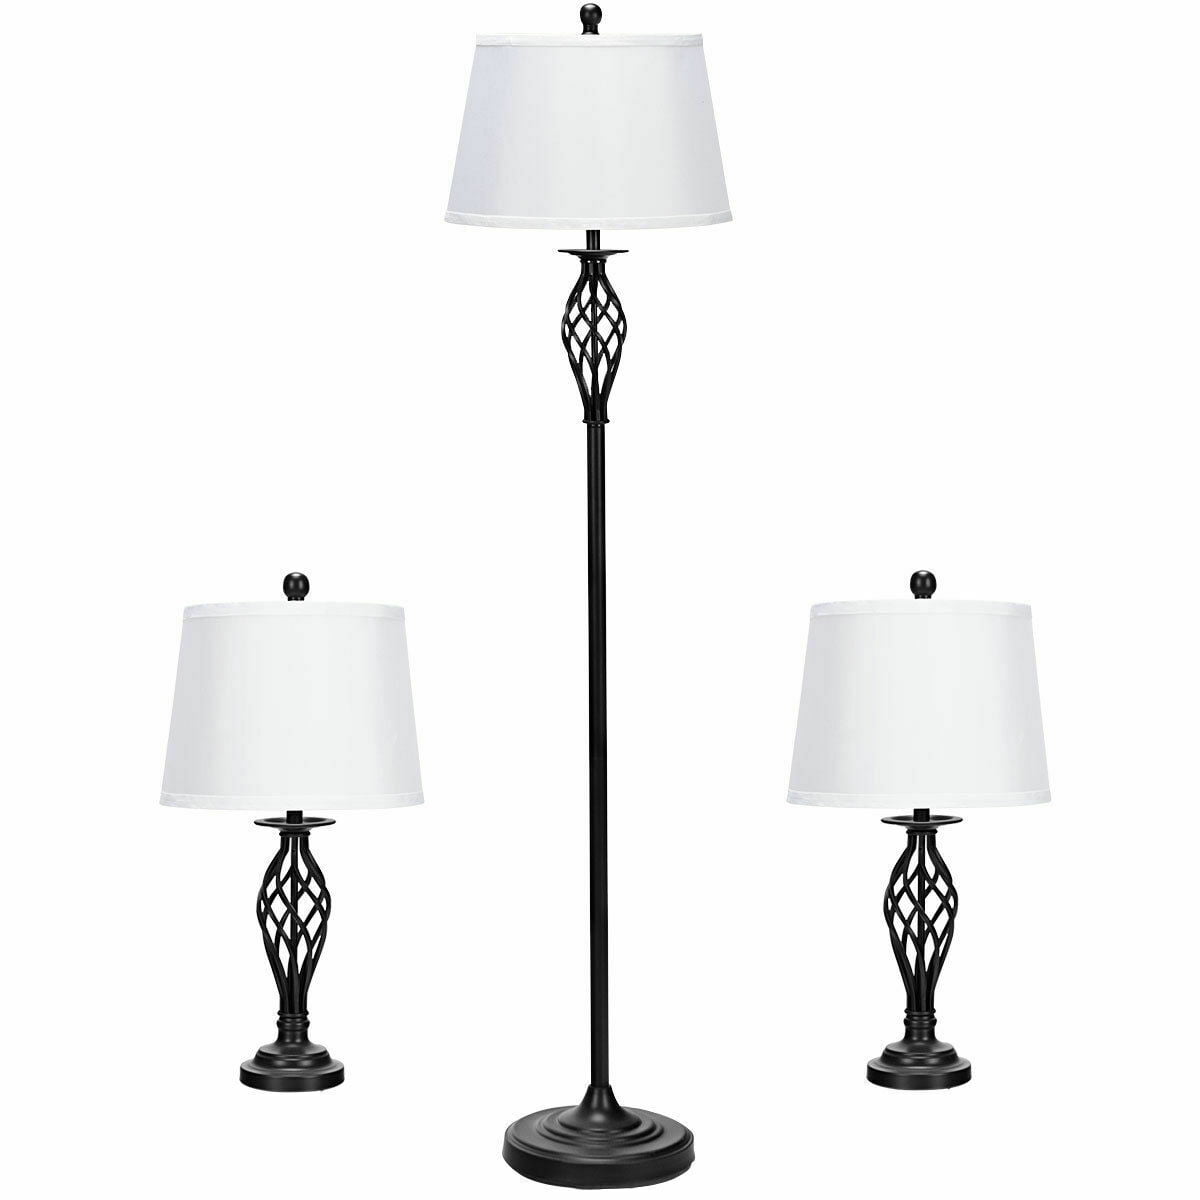 3Piece Lamp Set 2 Table Lamps 1 Floor Lamp Fabric Shades